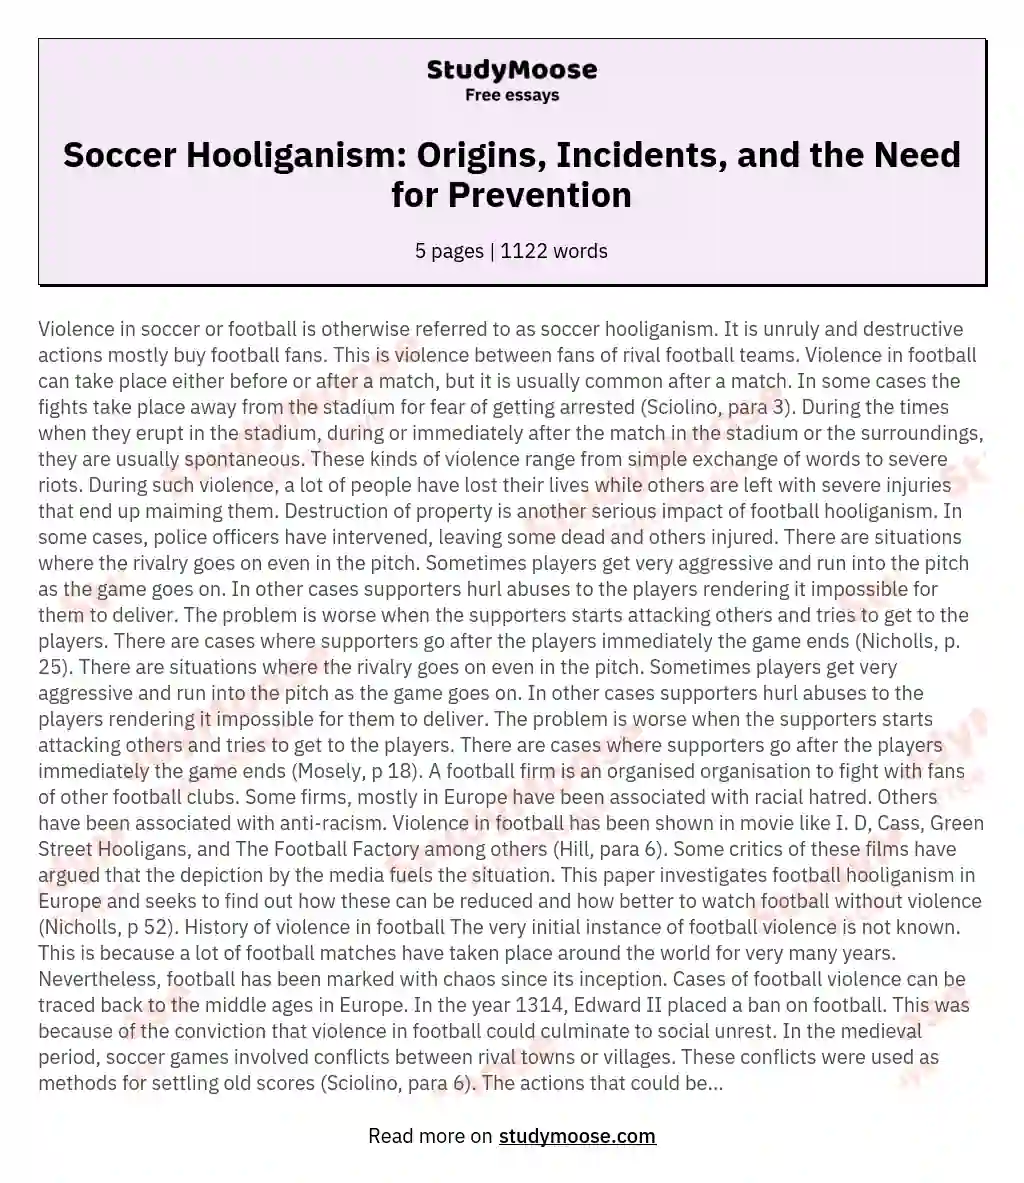 Soccer Hooliganism: Origins, Incidents, and the Need for Prevention essay